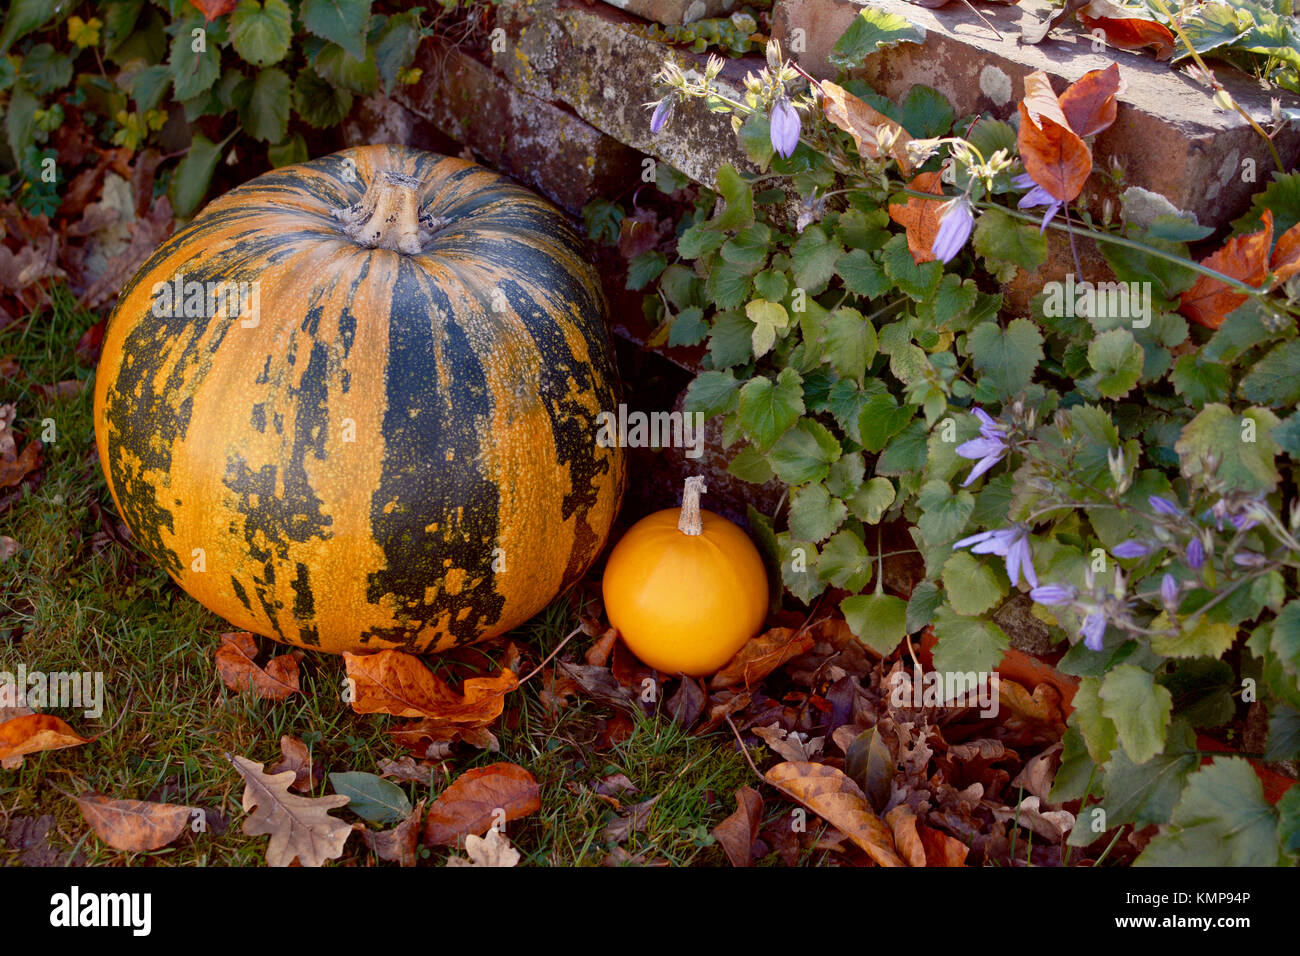 Large striped pumpkin with a small orange gourd in an fall garden, surrounded by leaves and plants Stock Photo